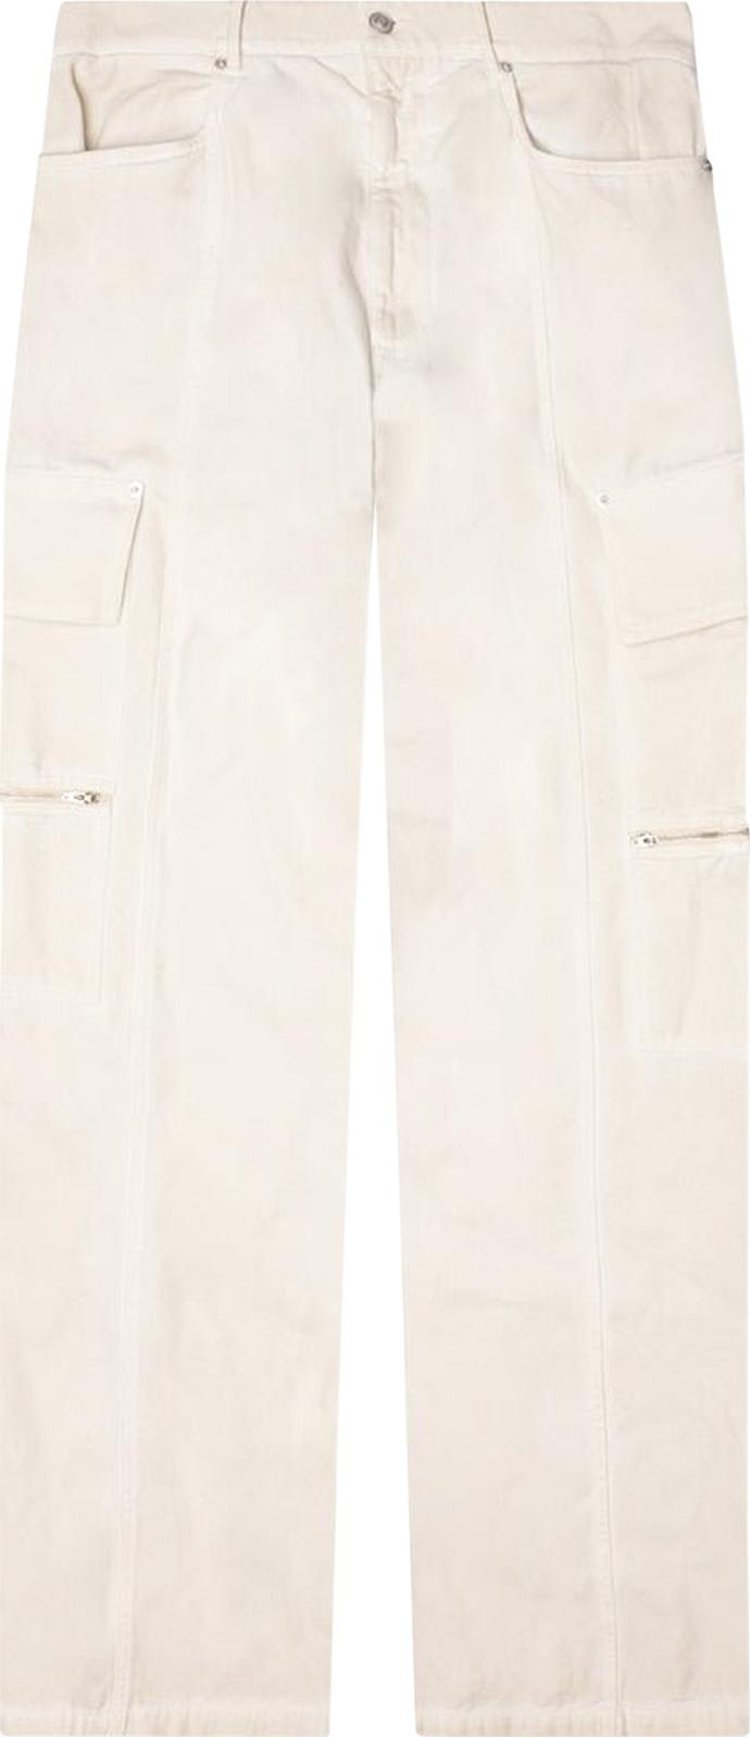 Buy 1017 ALYX 9SM Skater Pant 'Washed Light Tan' - AAMPA0359FA01 ...